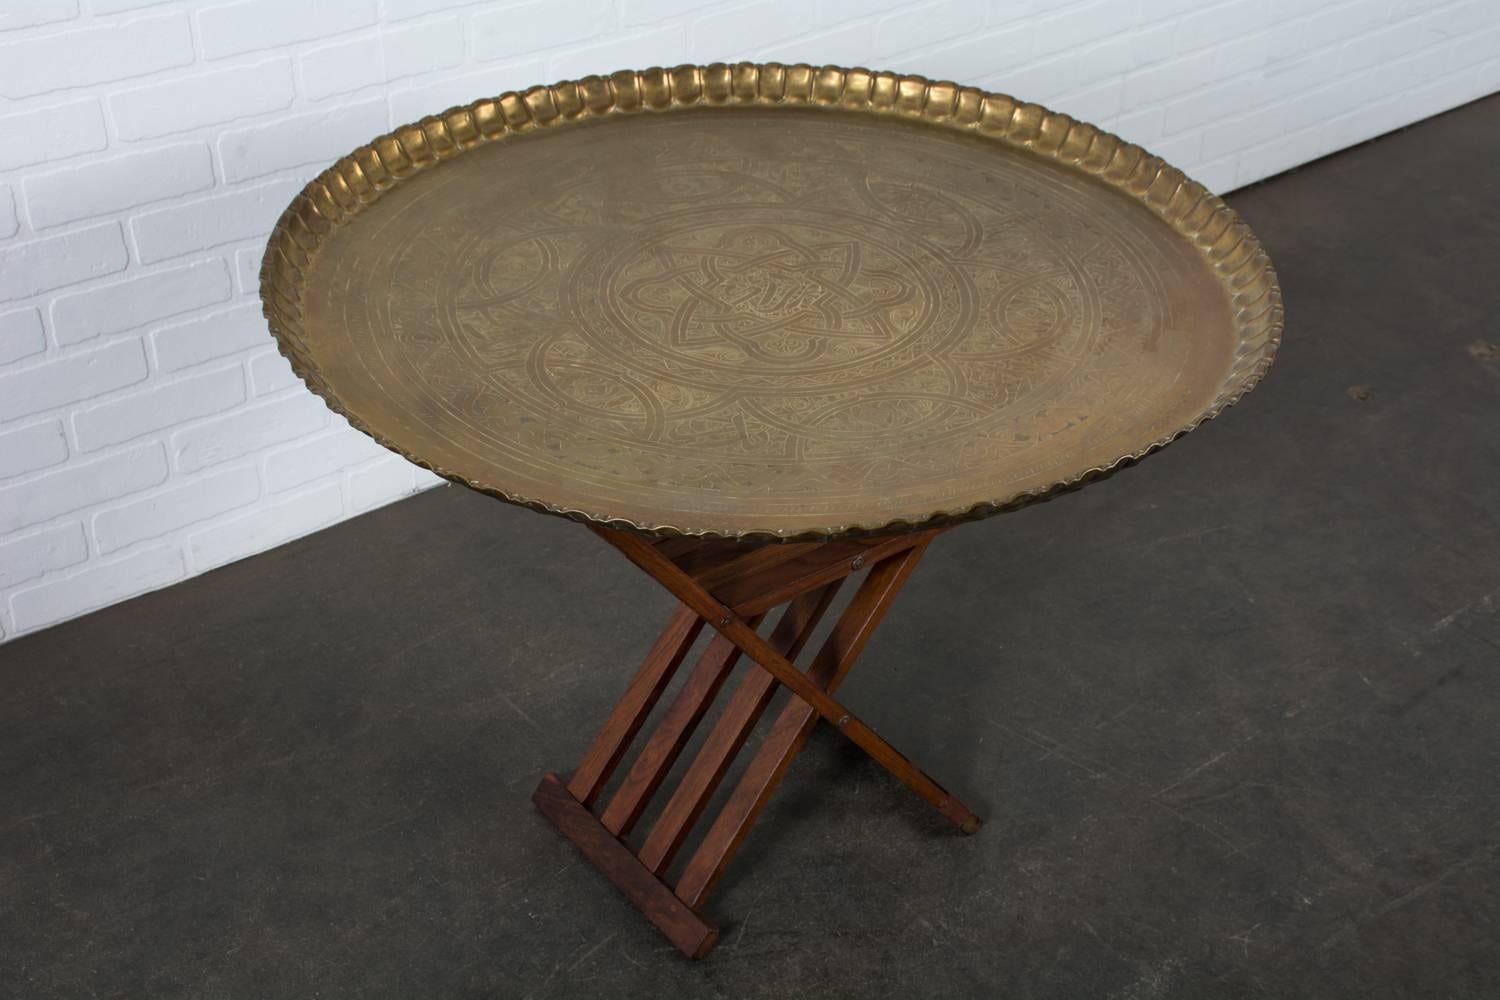 Moroccan Brass Tray Table with Rosewood Slat Base, Morroco, 1960s